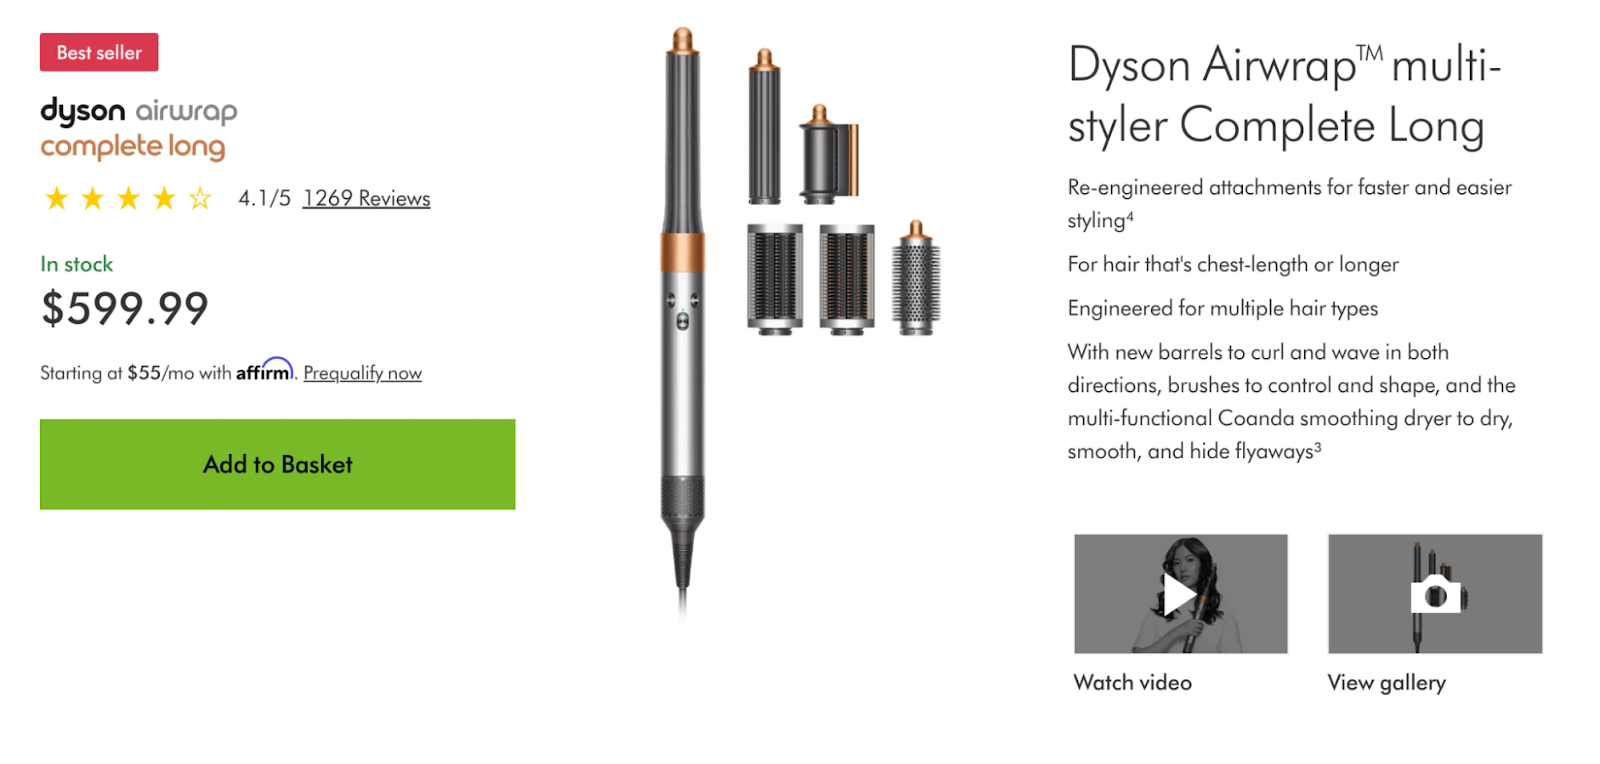 Dyson Airwrap, an example of a product bundle on Shopify